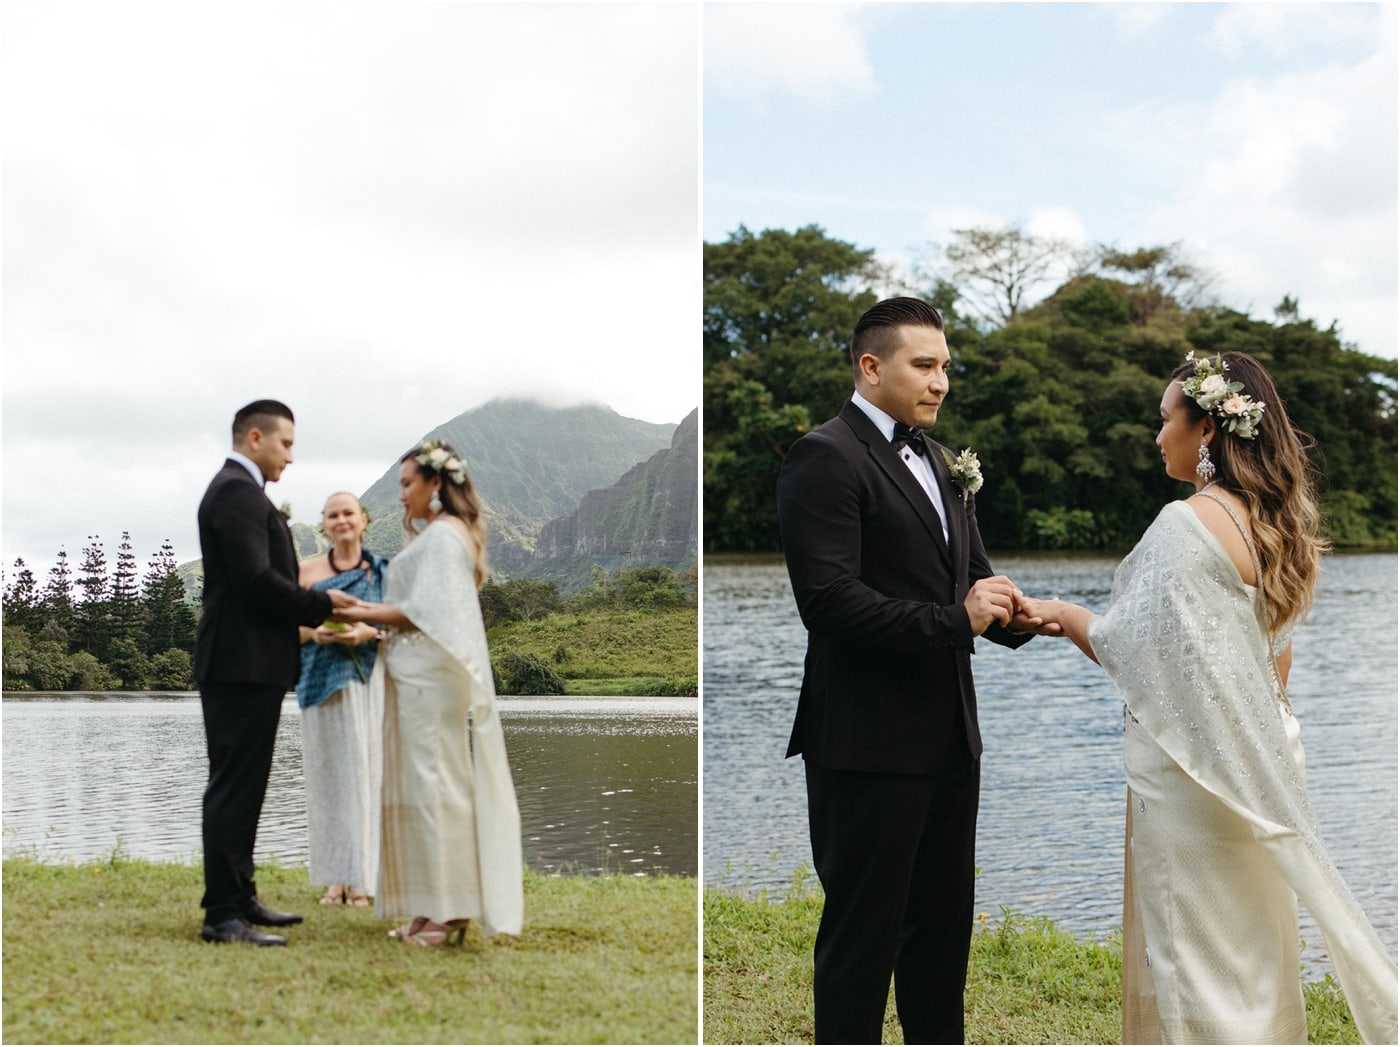 How to Elope with Family - Hawaii elopement photographer